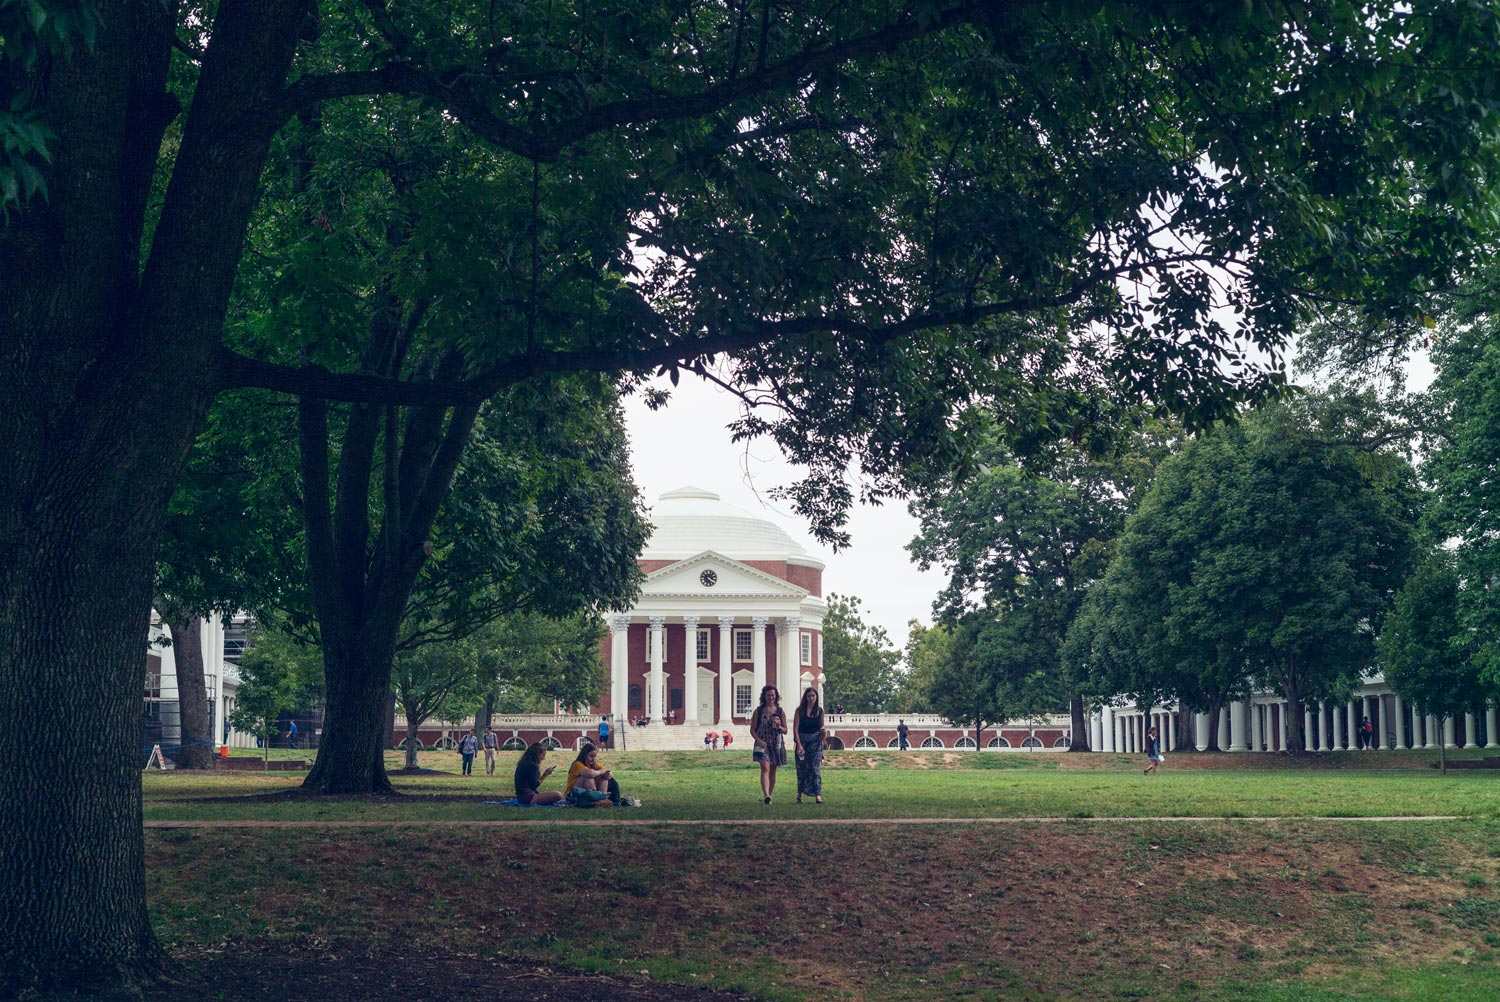 Students walking on the Lawn in front of the Rotunda